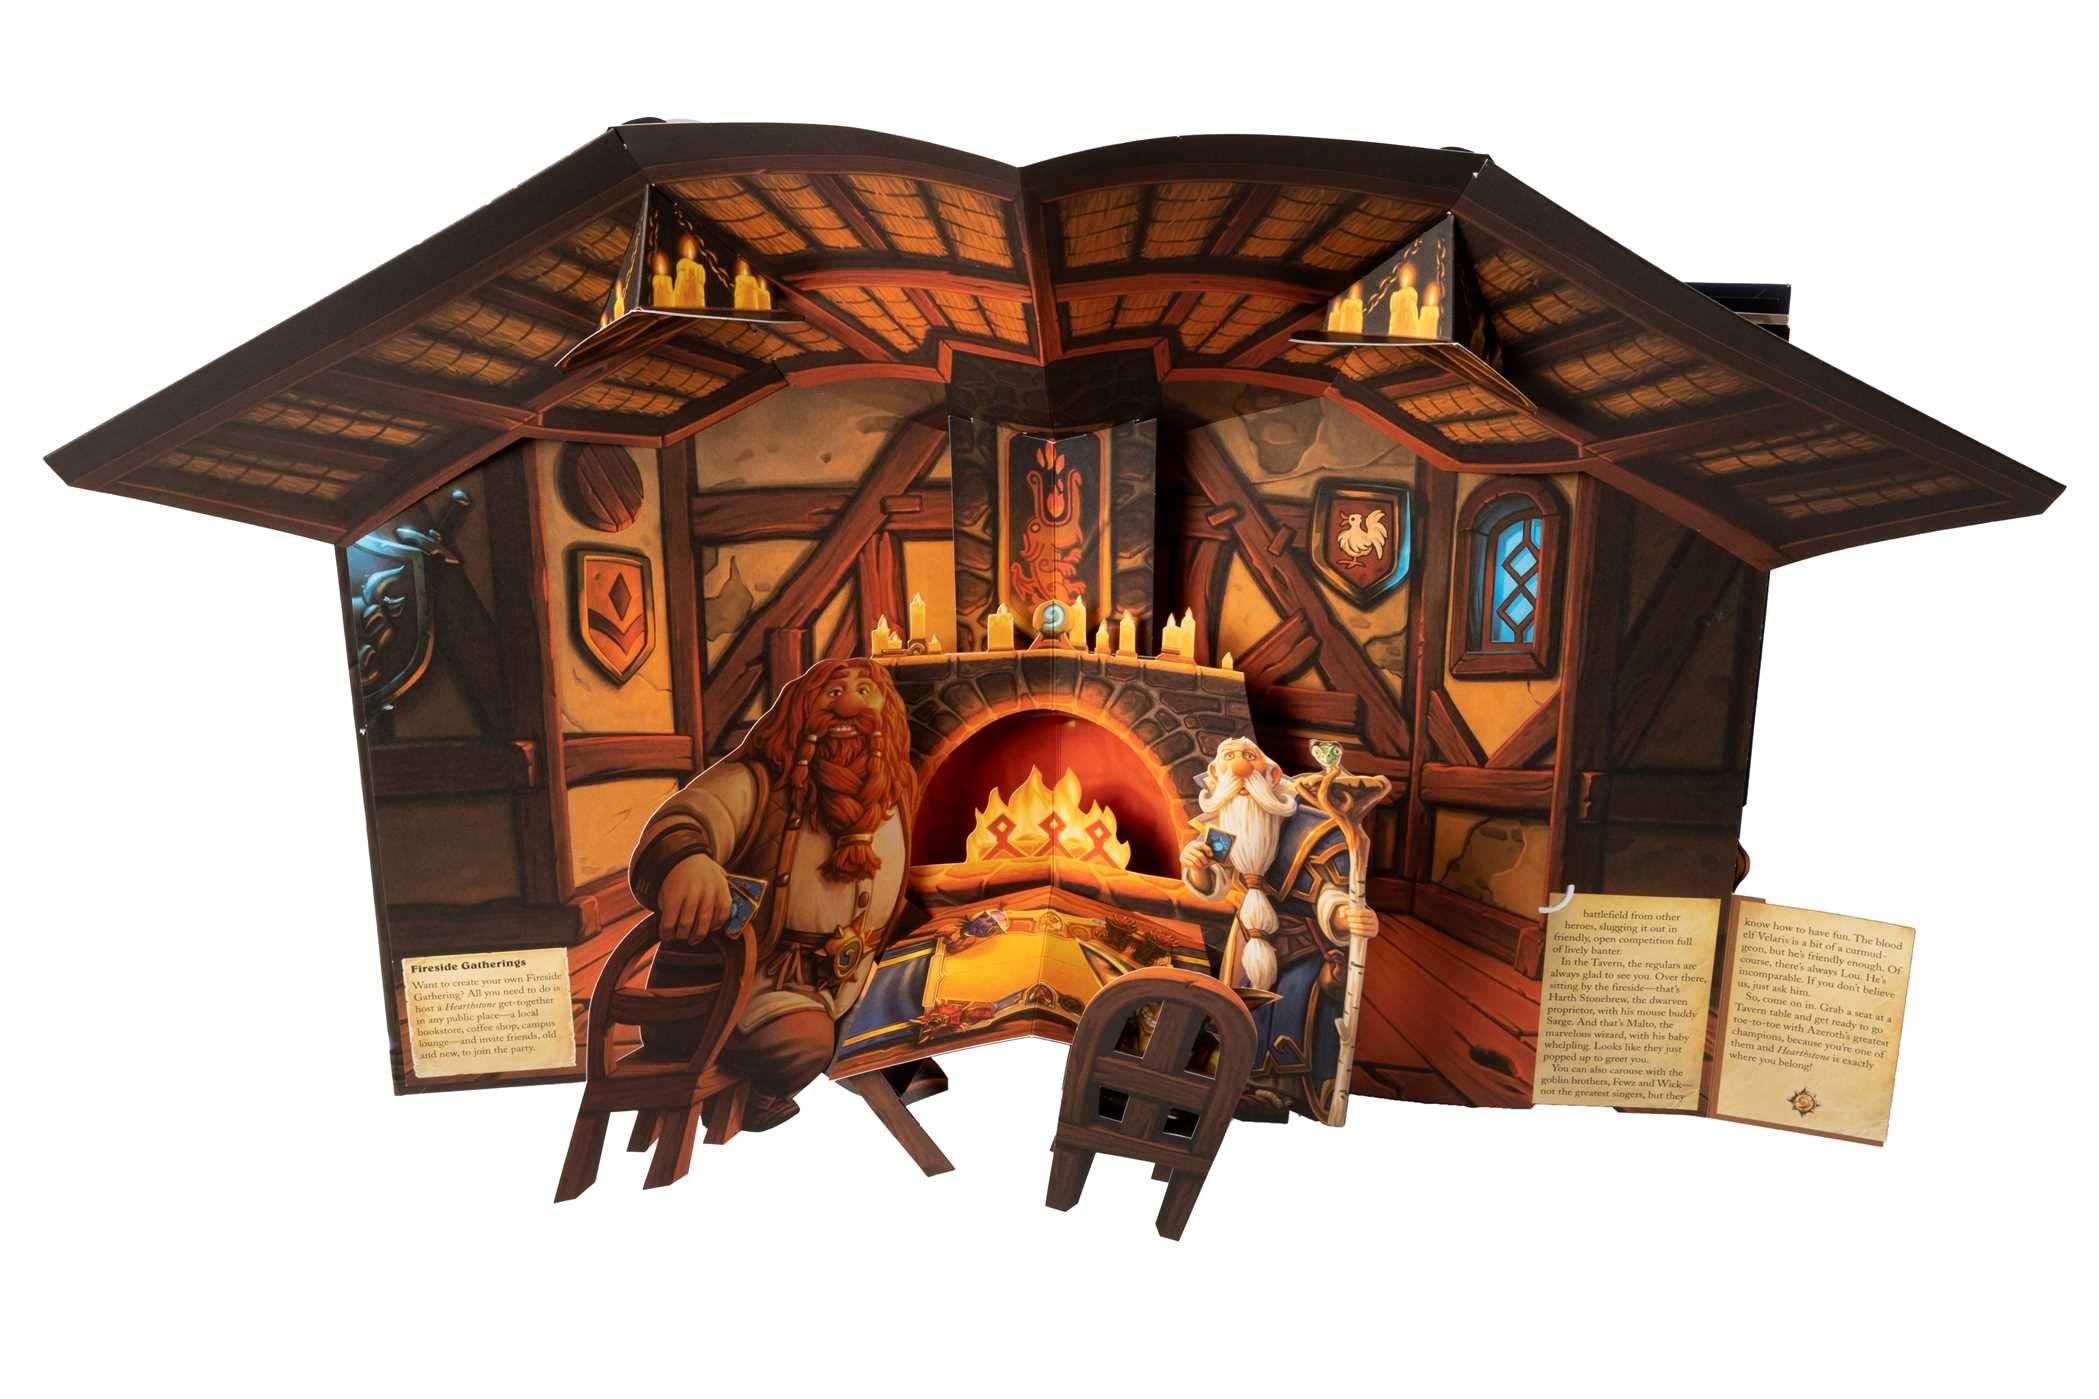 This Hearthstone pop-up book actually looks amazing